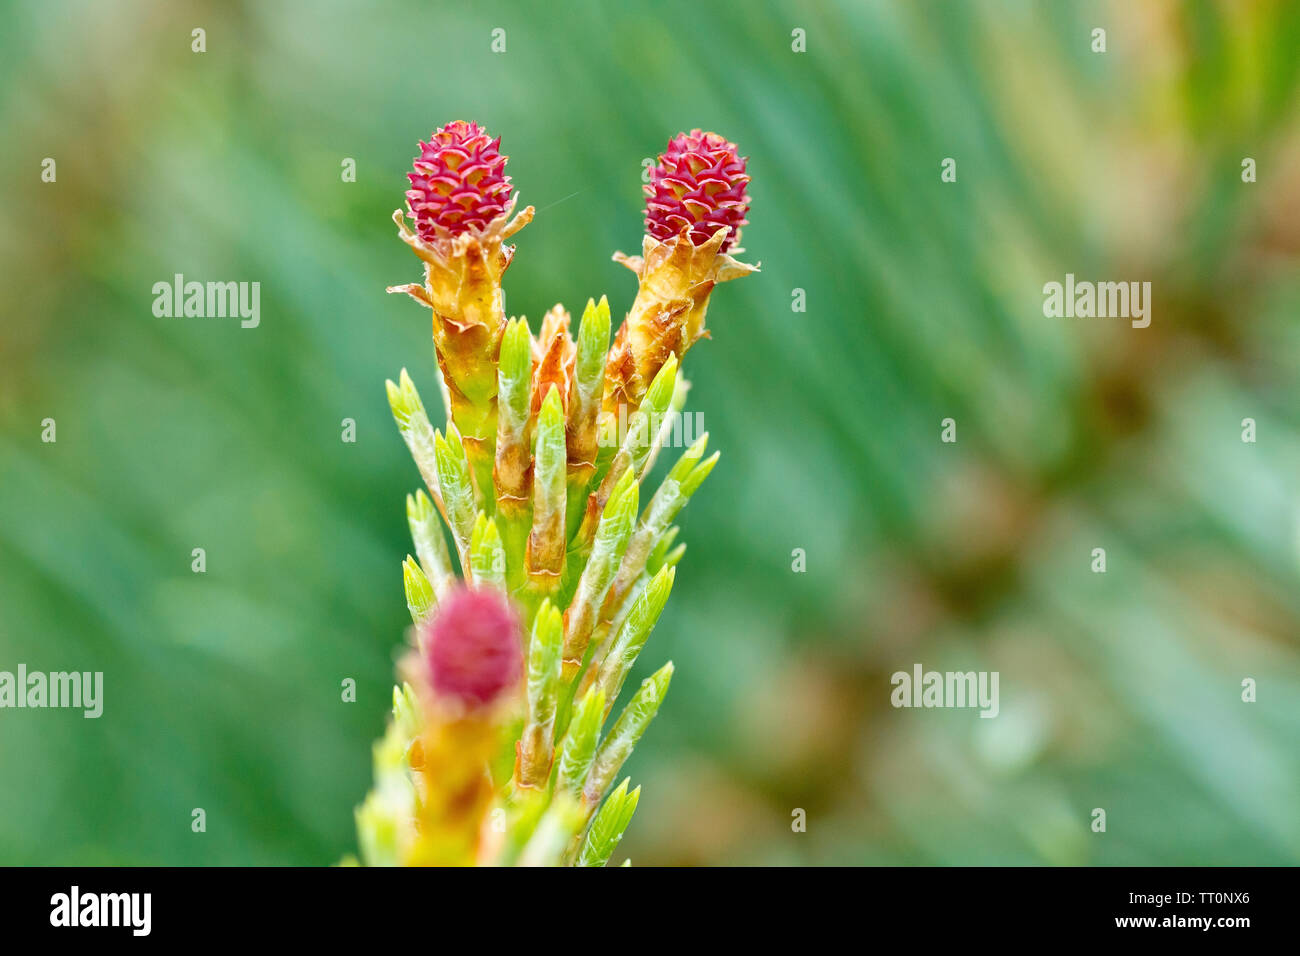 Scot's Pine (pinus sylvestris), close up of new spring growth showing the emerging needles and the pink female flower. Stock Photo